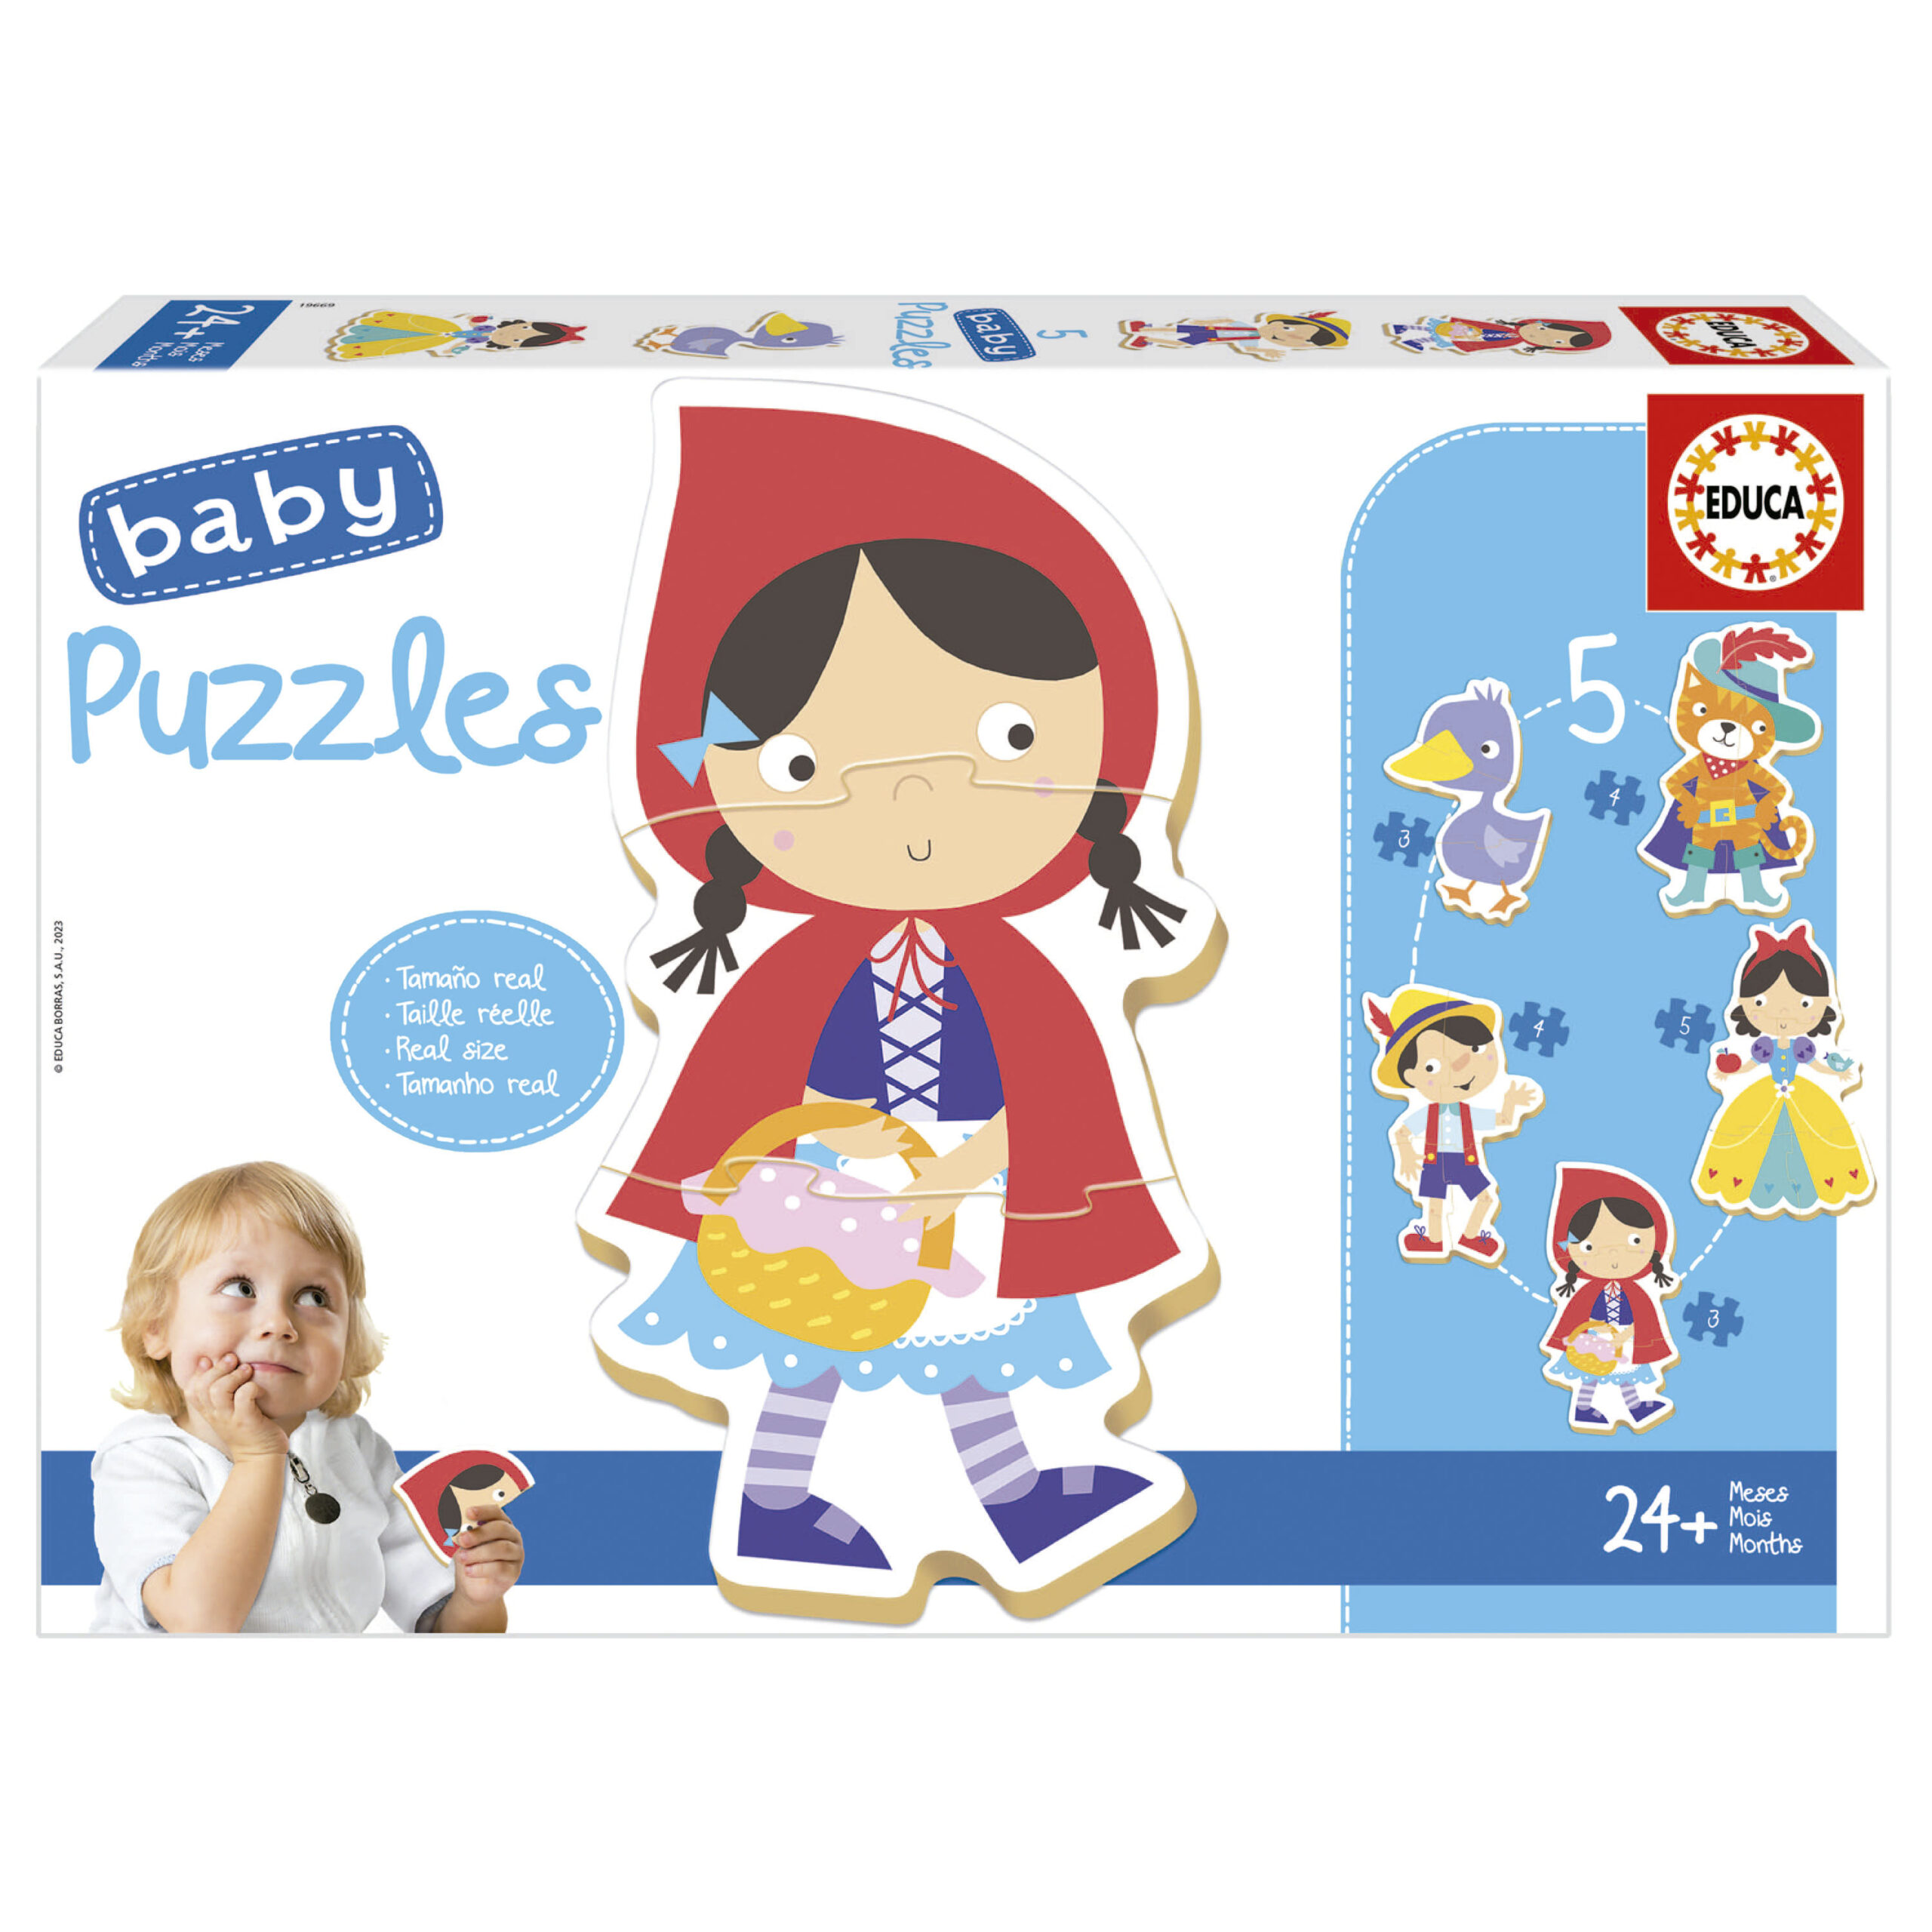 Baby Puzzles Once upon a time